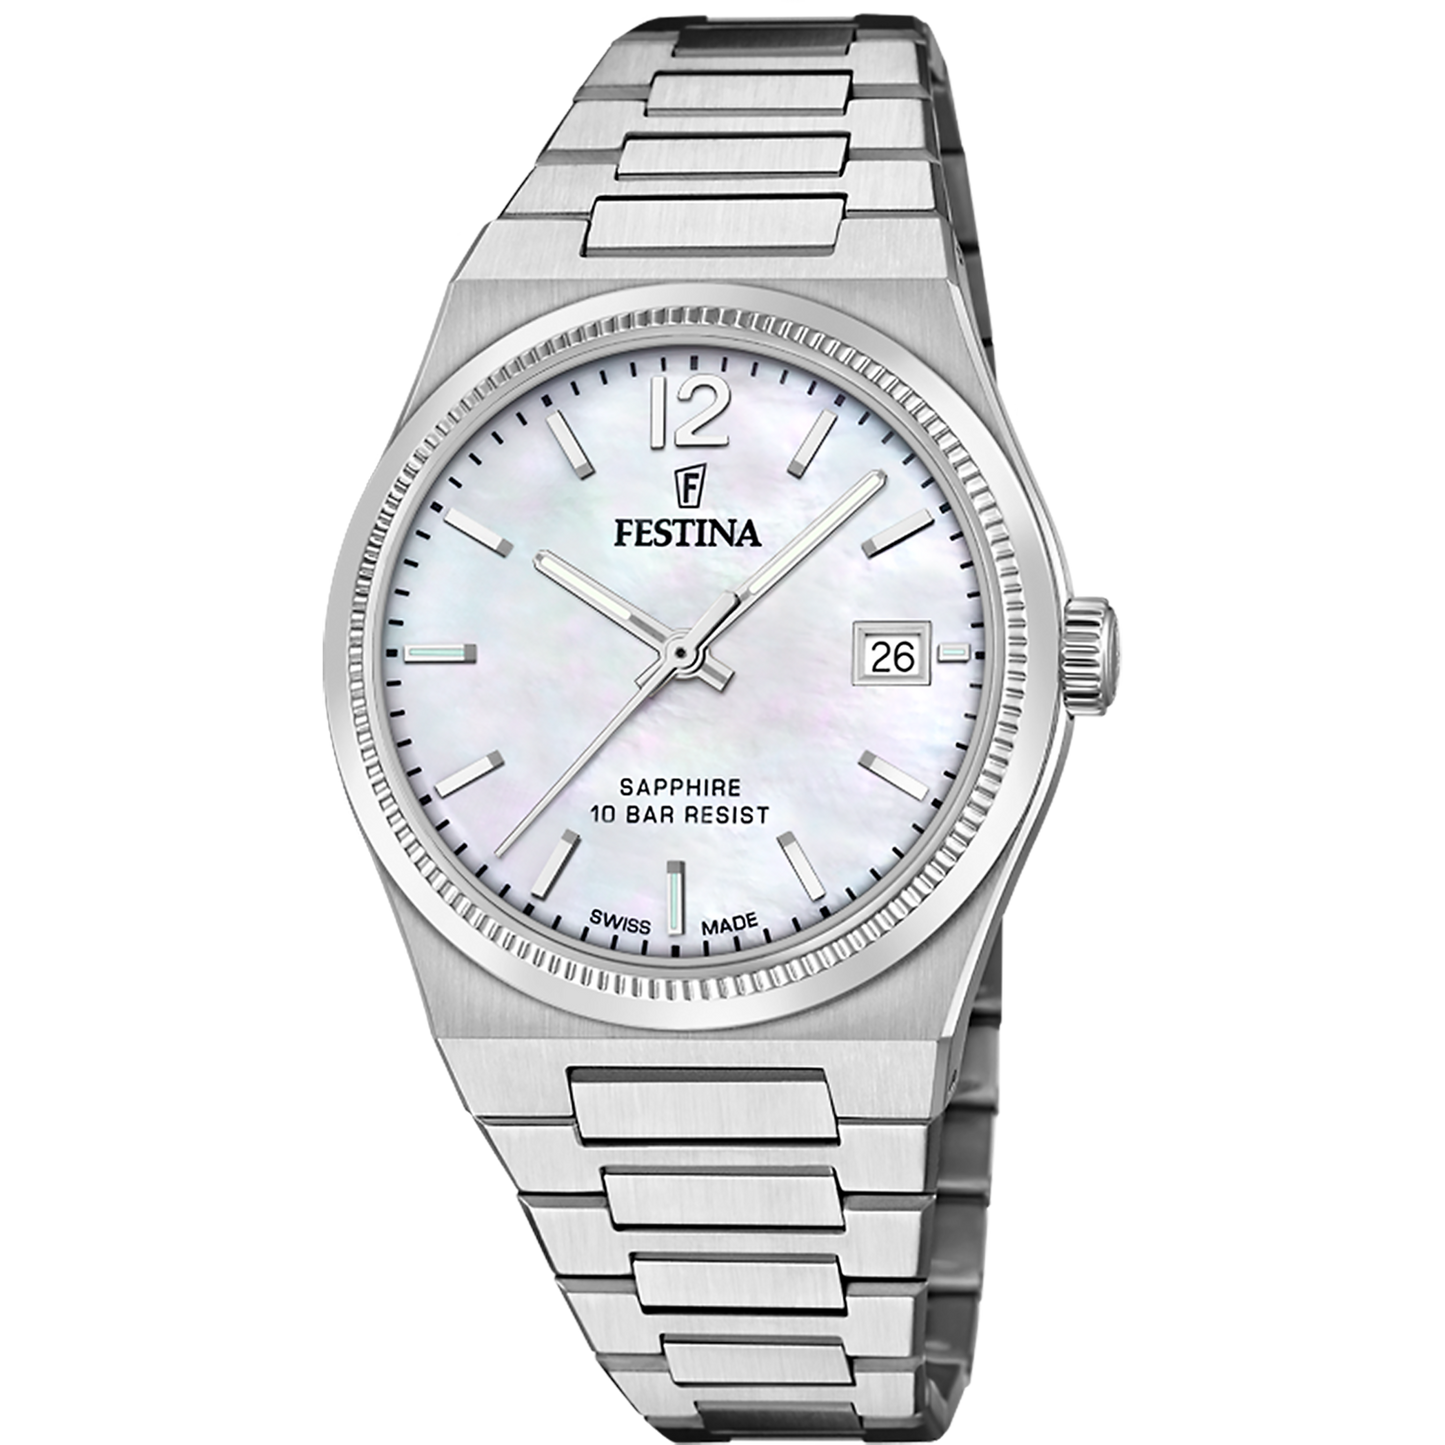 Festina Swiss Made F20035-1 - Analog - Strap Material Stainless Steel I Festina Watches USA